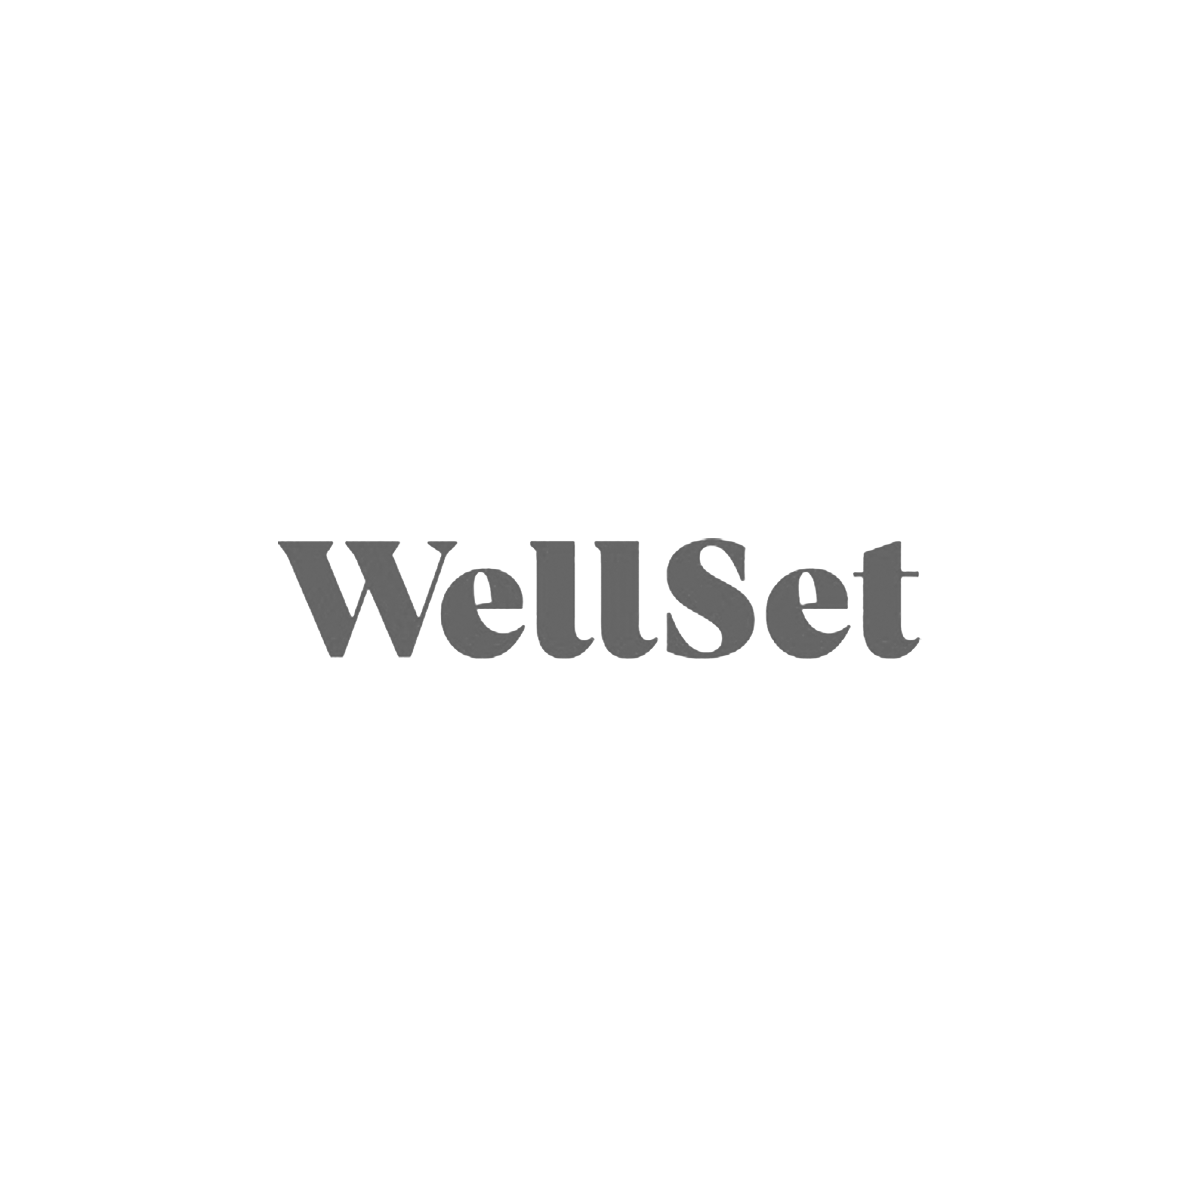 WellSet grayscale.png